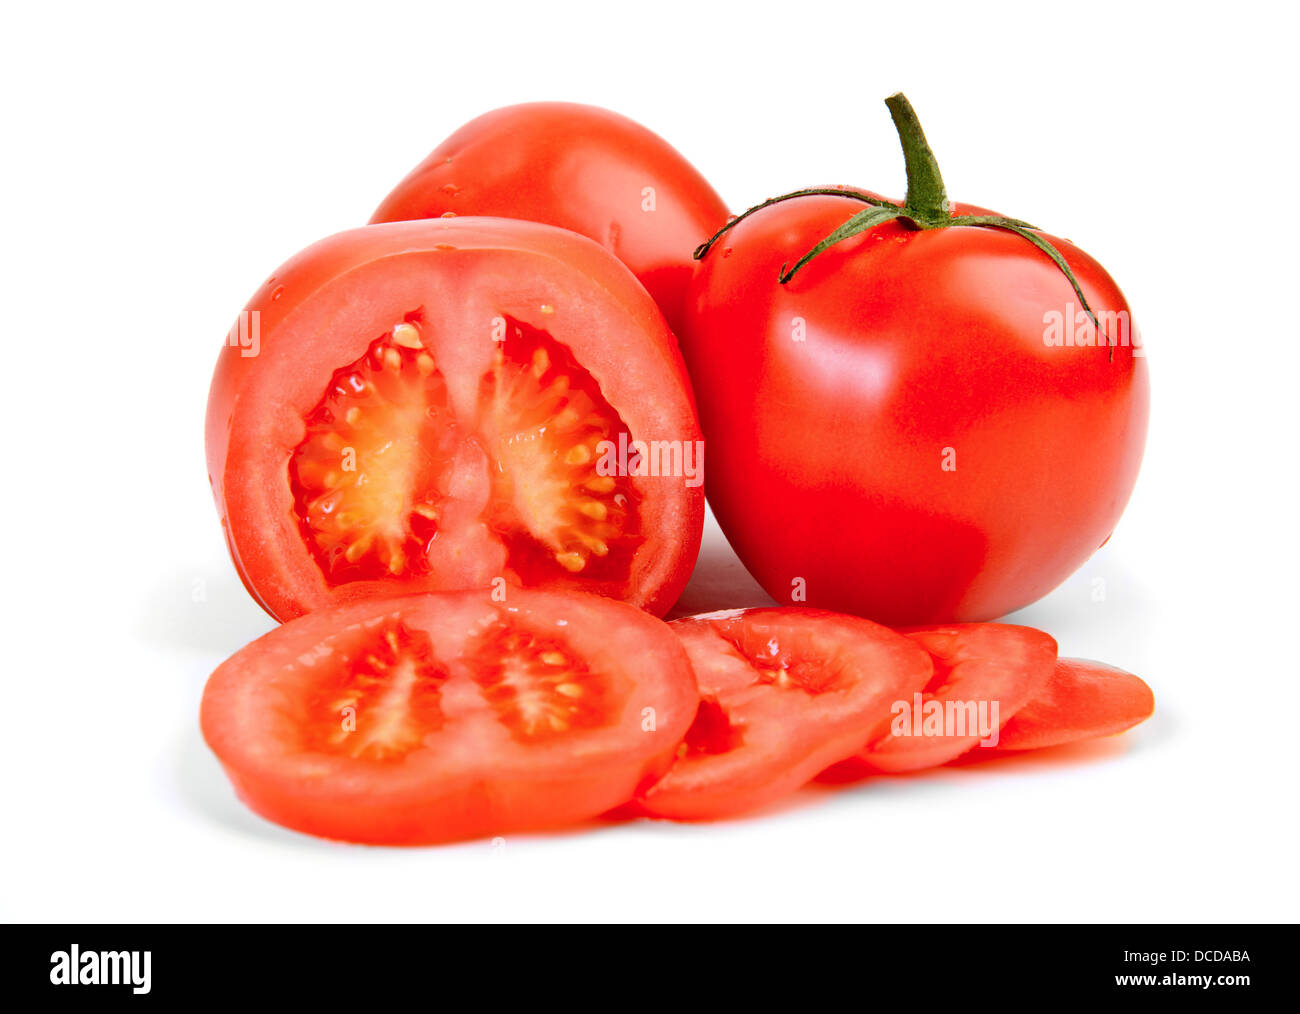 Red tomato whole and cuts isolated over white Stock Photo